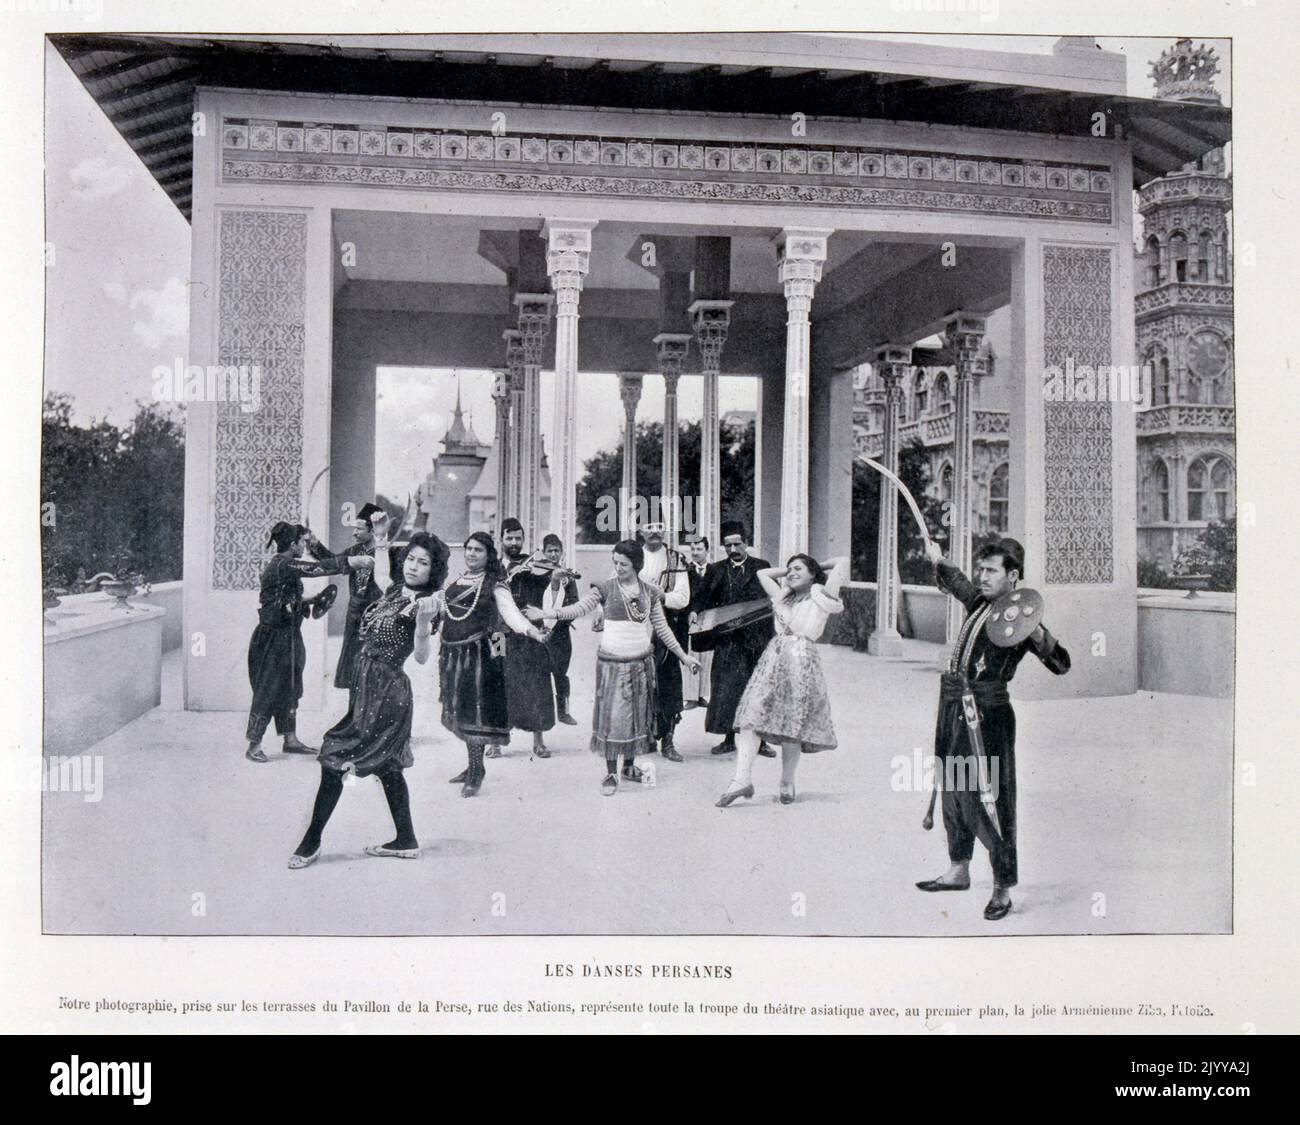 Exposition Universelle (World Fair) Paris, 1900; The Exposition Universelle of 1900, better known in English as the 1900 Paris Exposition, was a world's fair held in Paris, France, from 14 April to 12 November 1900, to celebrate the achievements of the past century and to accelerate development into the next. The style that was universally present in the Exposition was Art Nouveau. The fair, visited by nearly 50 million, displayed many technological innovations; black and white photograph of Persian dancers on the terrace on the Rue des Nations. Stock Photo